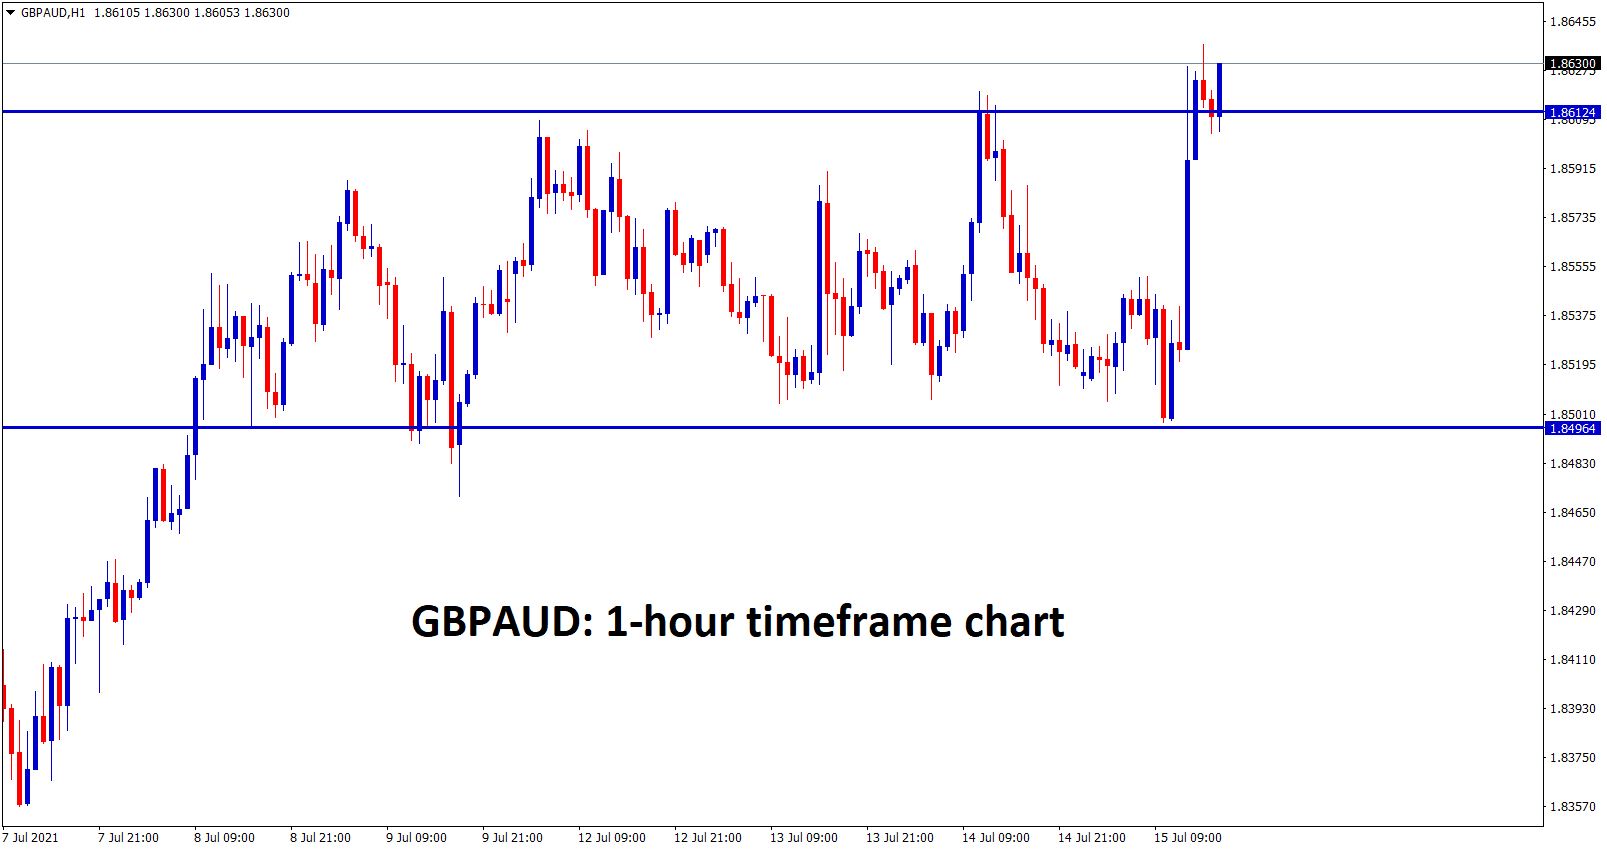 GBPAUD is consolidating between specific price ranges for a long time wait for a strong breakout from this consolidation zone